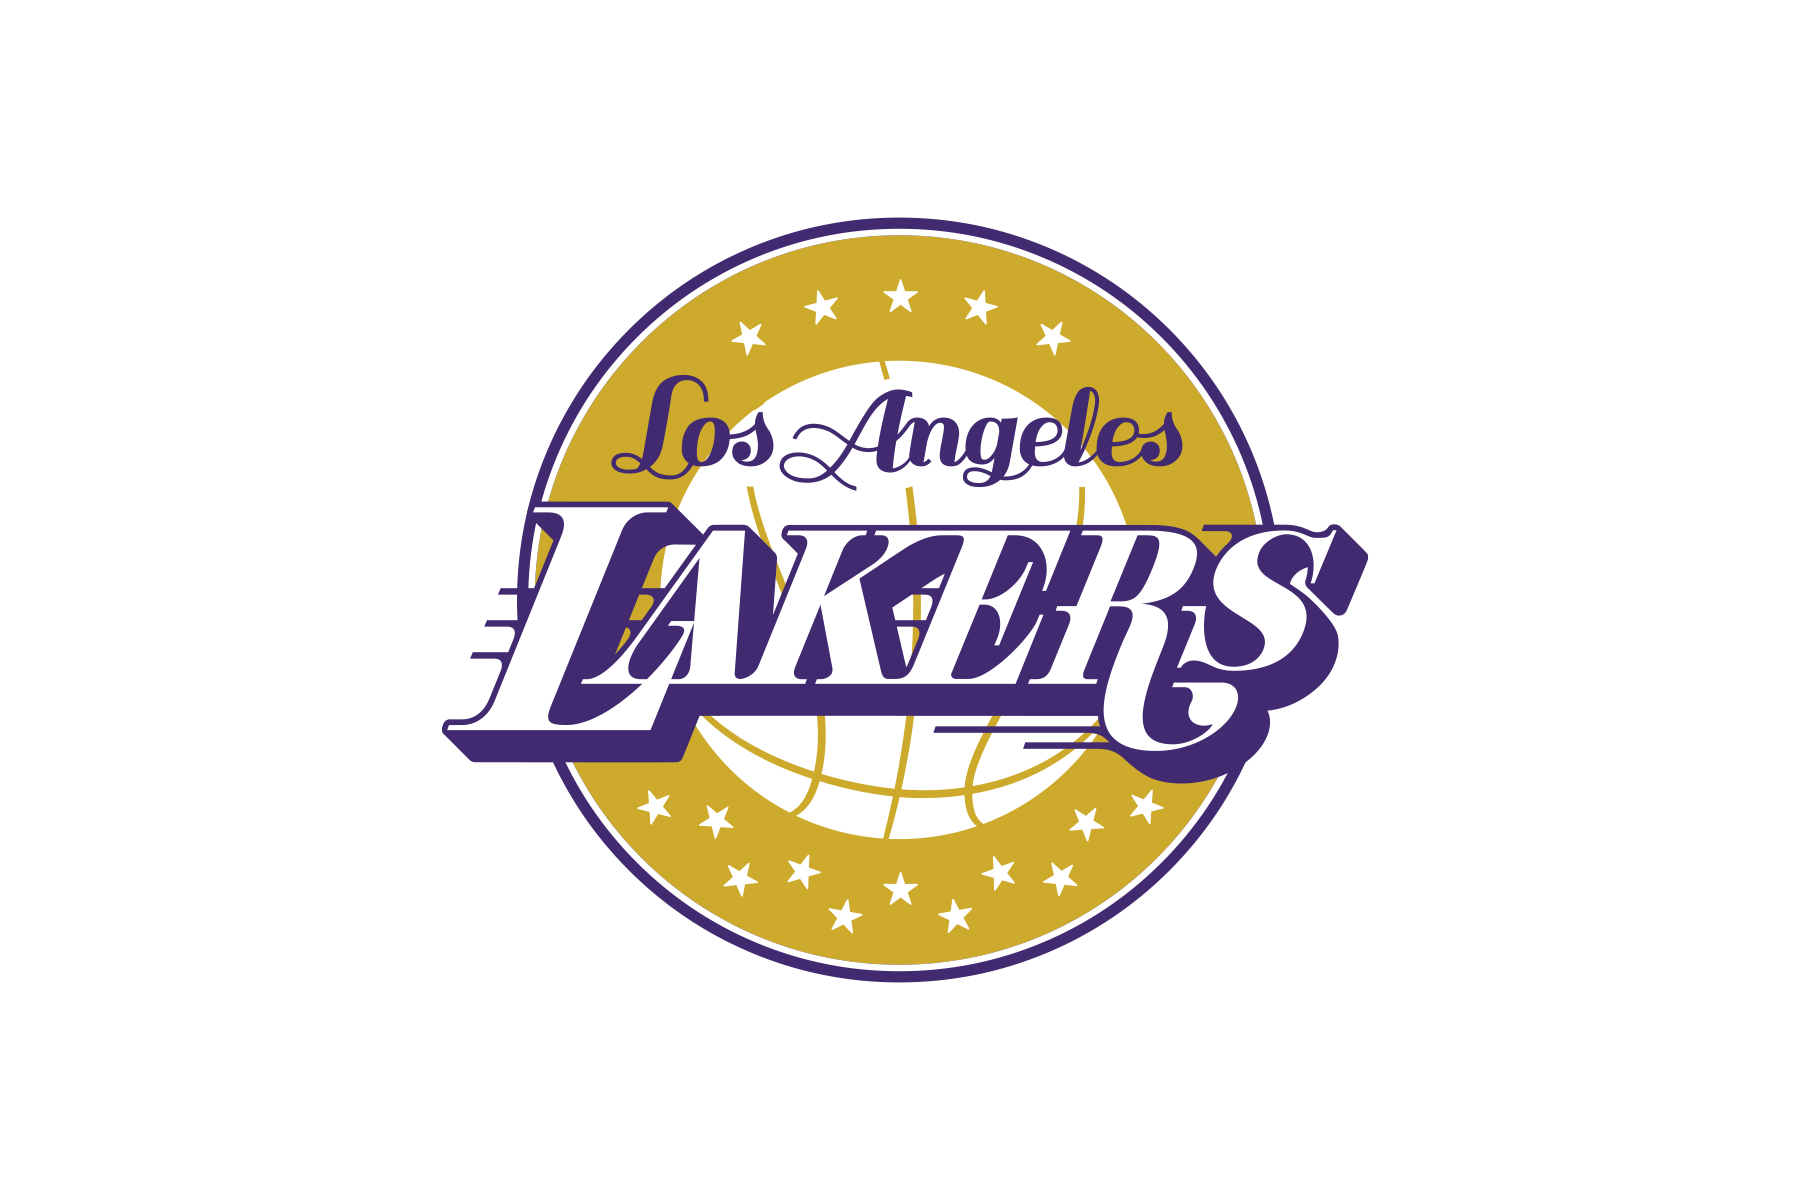 Los Angeles Lakers (@Lakers).